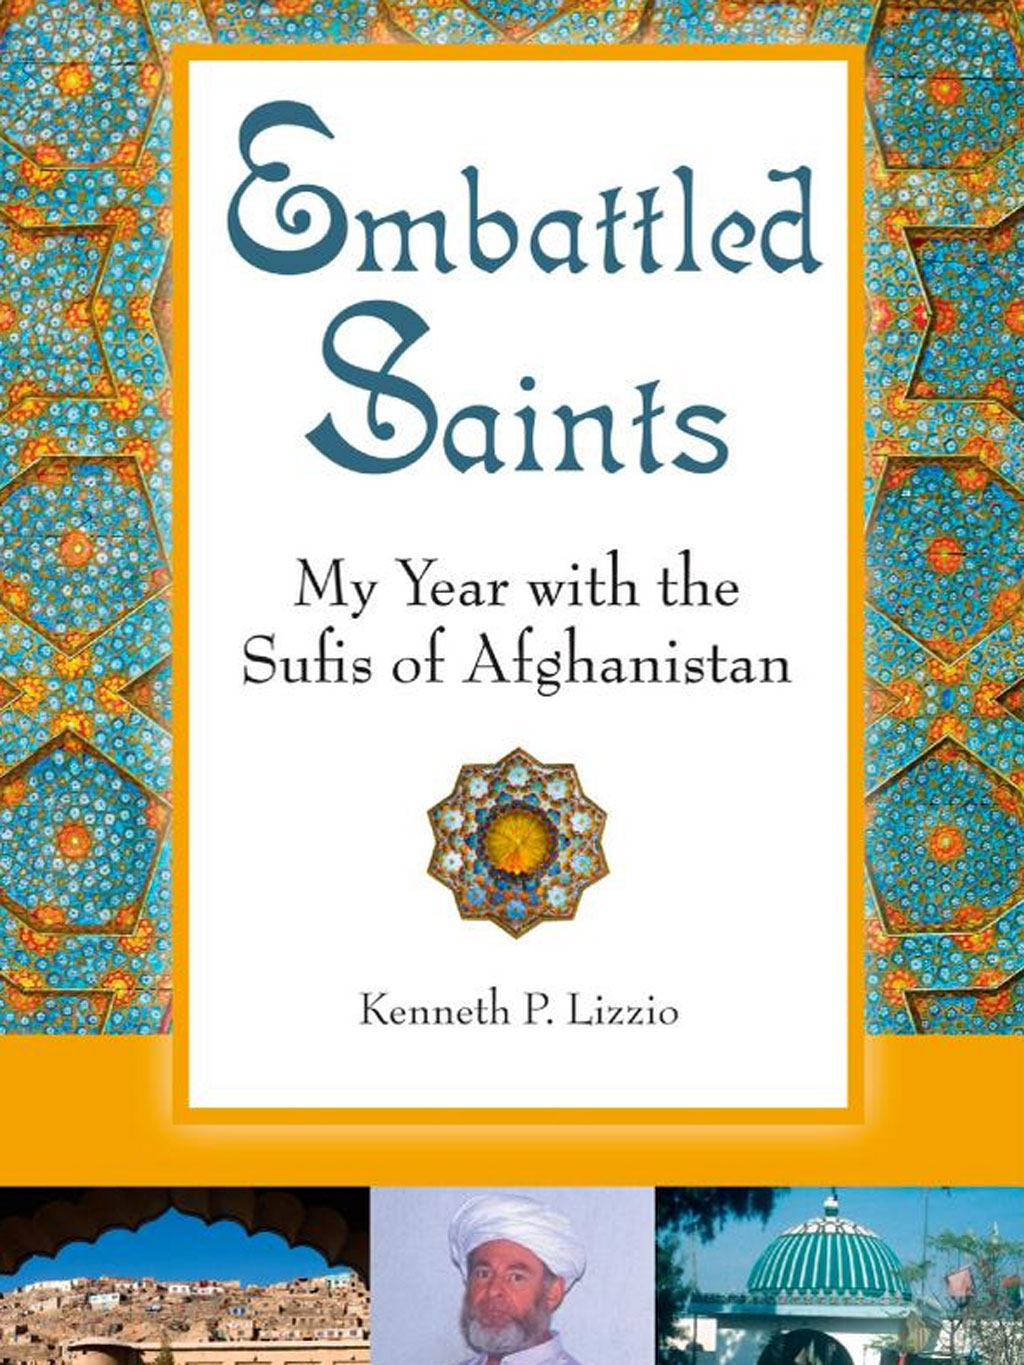 Cover of Kenneth P. Lizzio's book "Embattled Saints – My Year with the Sufis of Afghanistan"  (photo: Quest Books)